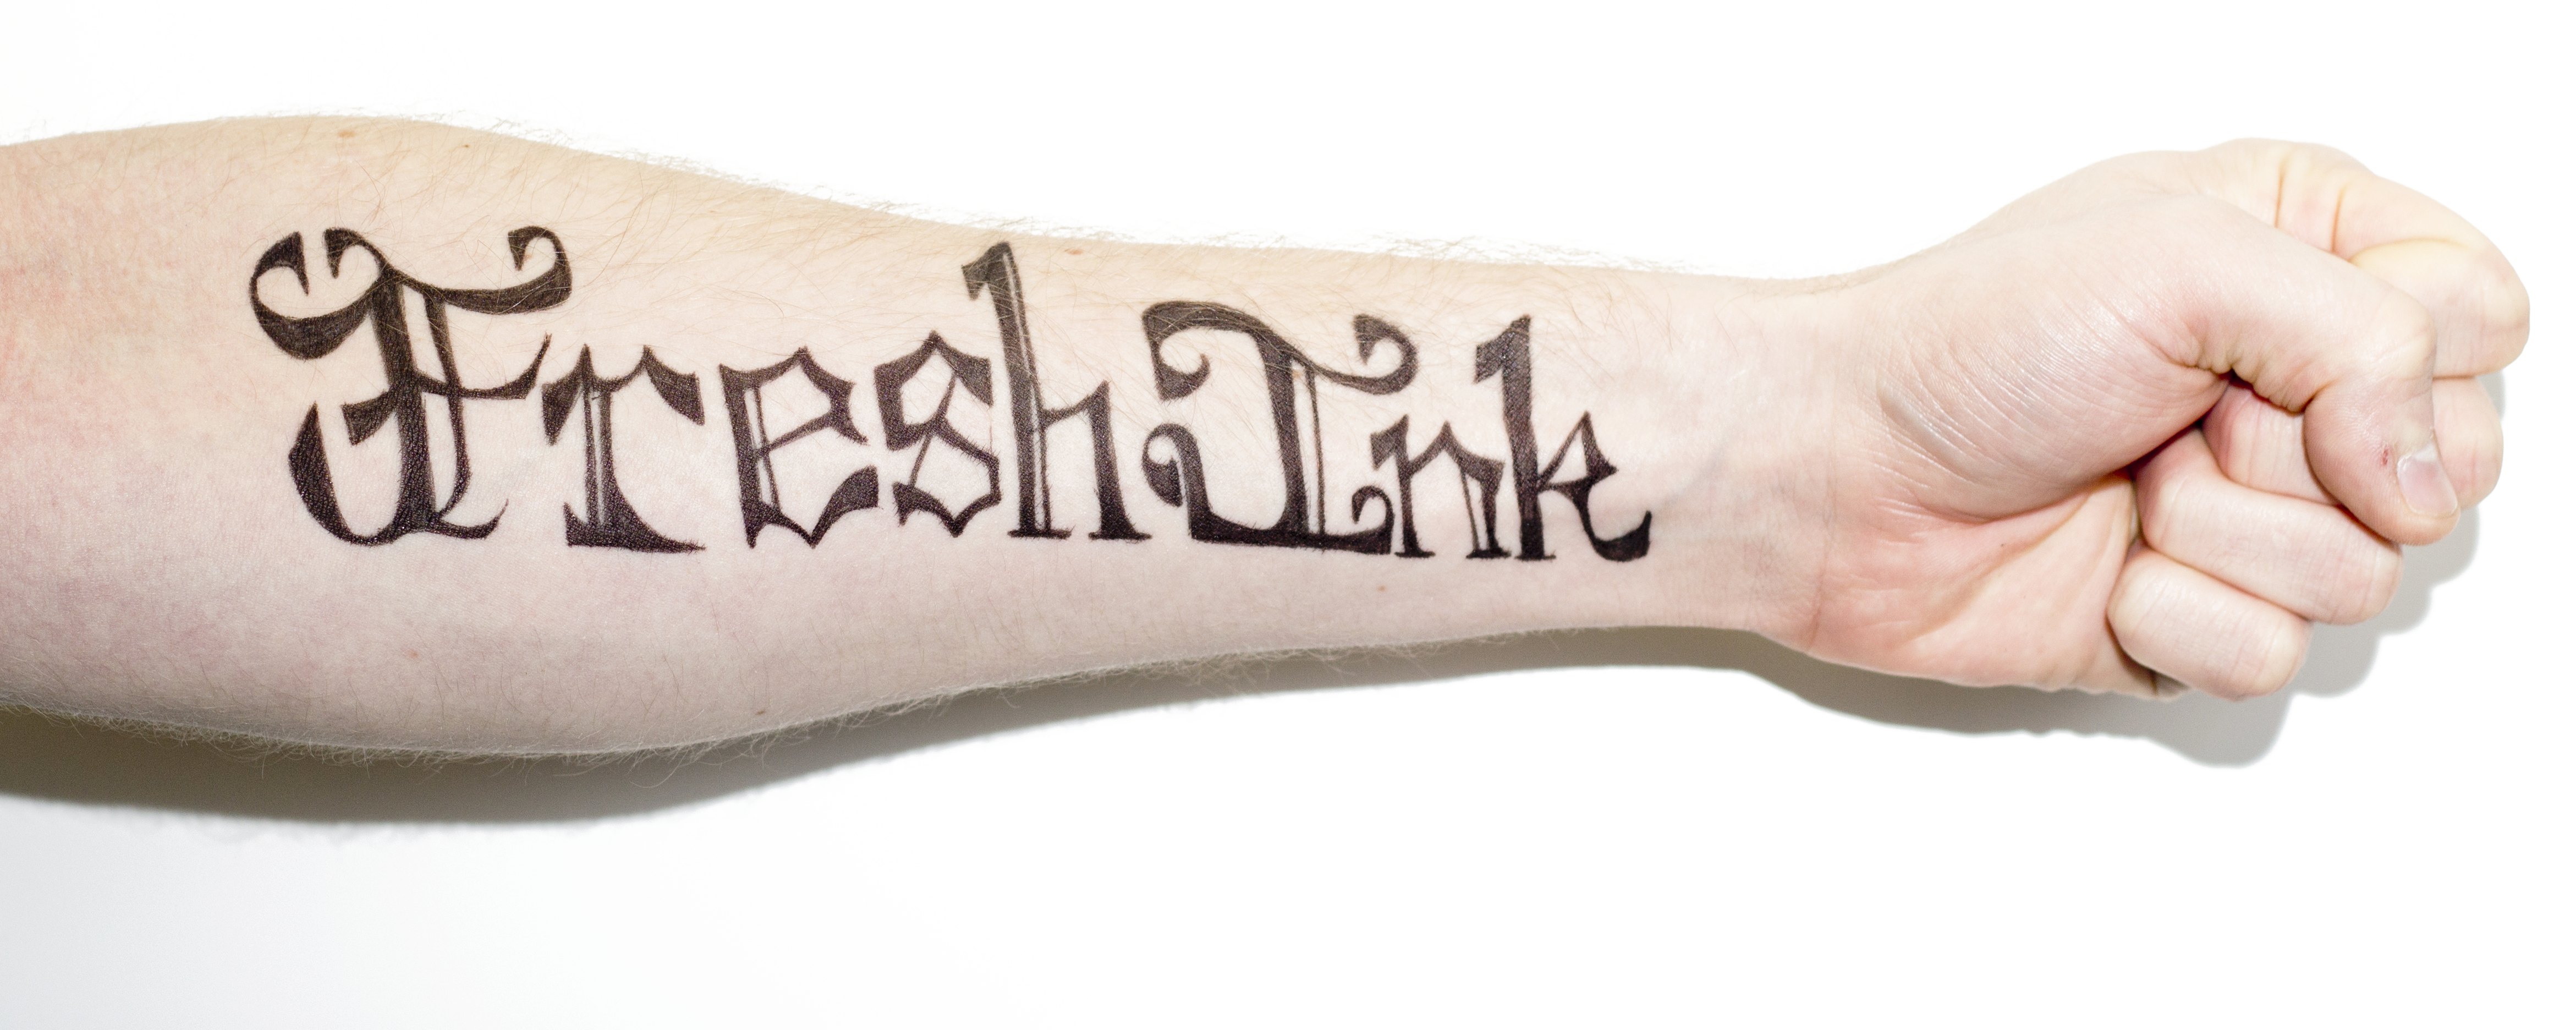 Fresh ink, fresh start: Tattoo cover-up event aims to erase hate